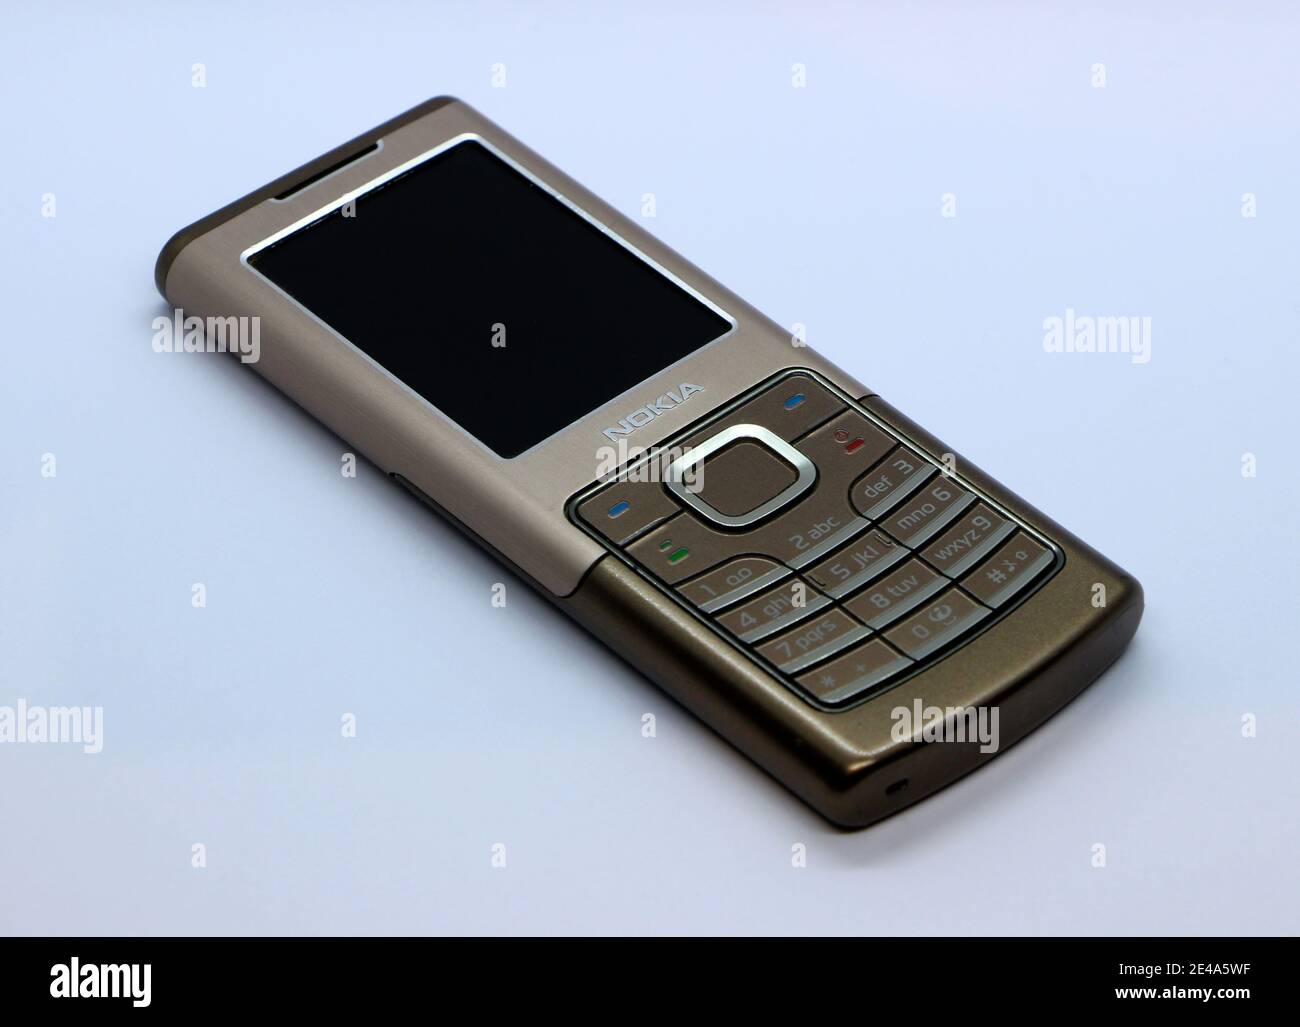 Nokia 6500 Classic Bronze brushed mobile phone released in 2007 against a white background Stock - Alamy